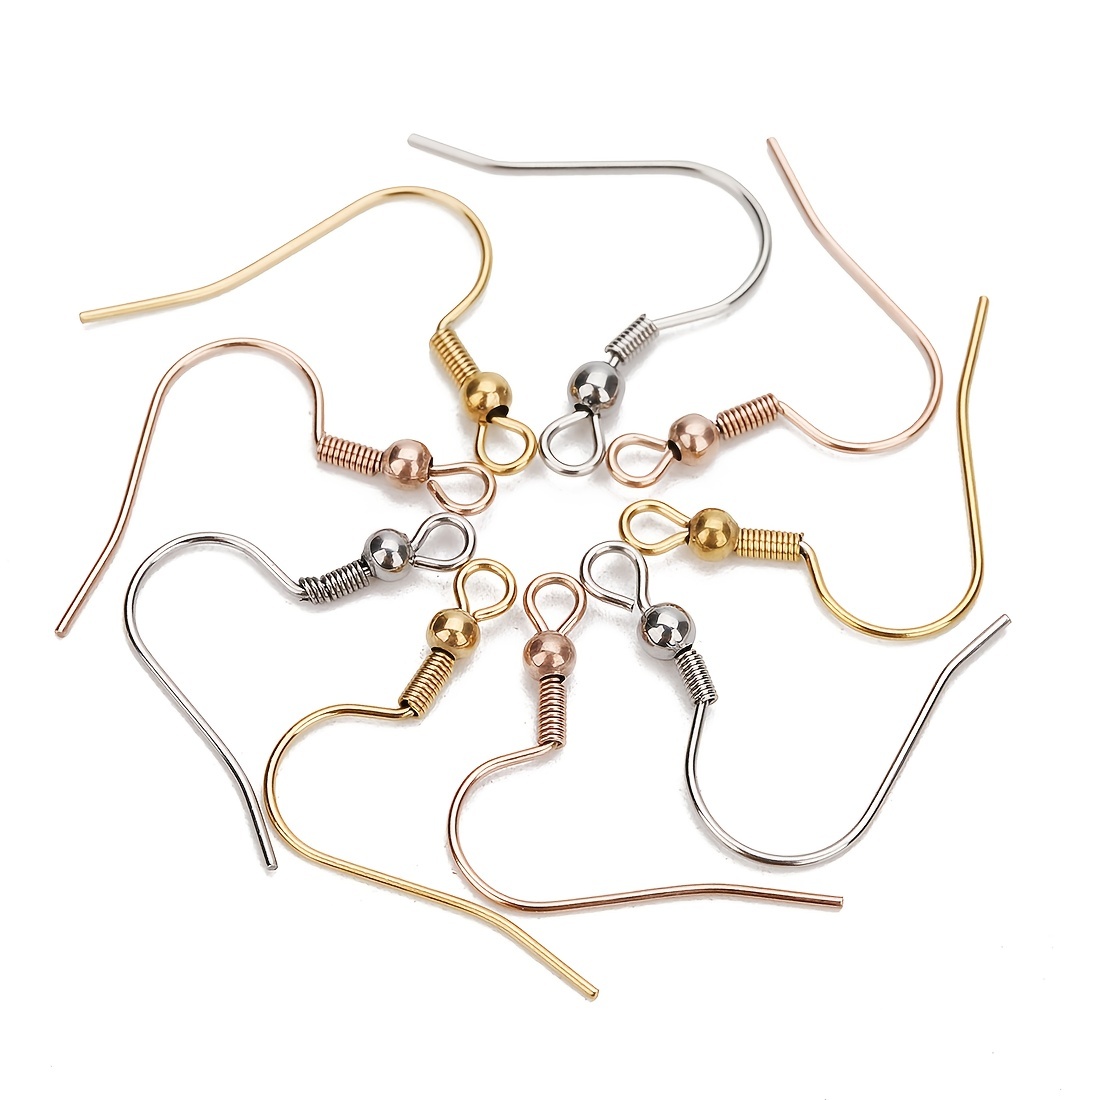 No Fade 20pcs Stainless Steel Earrings Hooks Gold Color Leverback